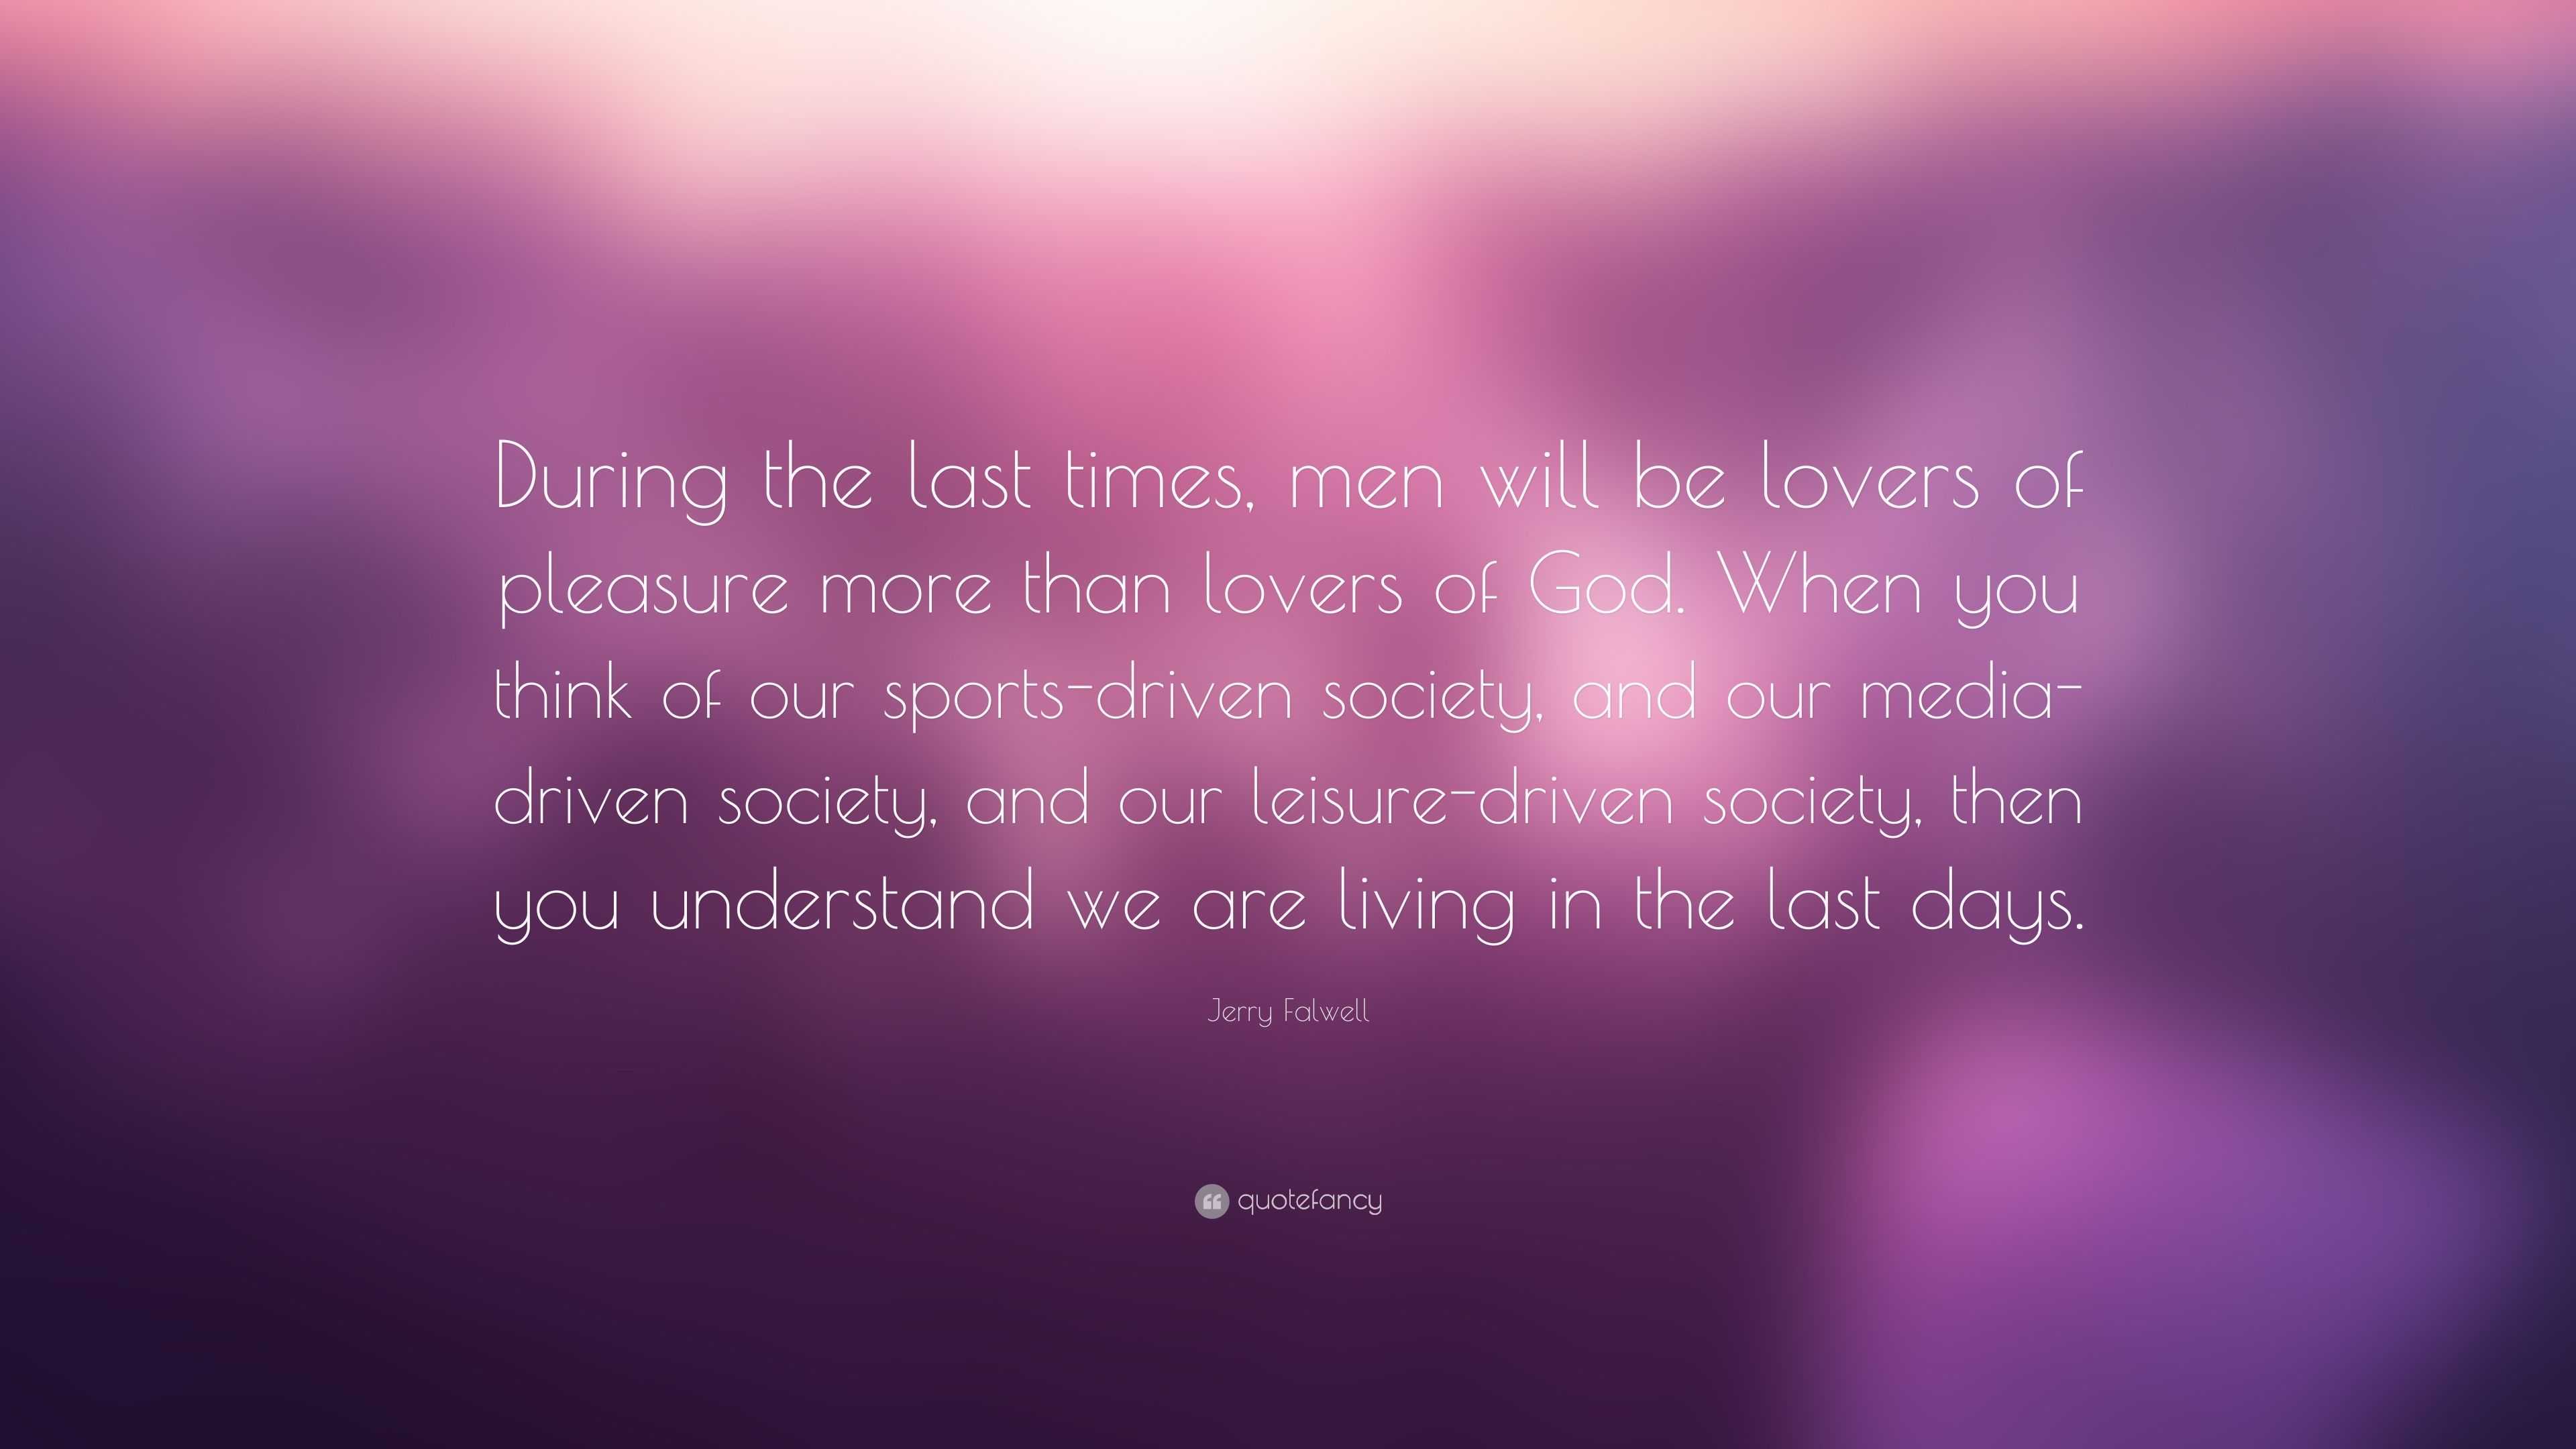 Jerry Falwell Quote: “During the last times, men will be lovers of ...